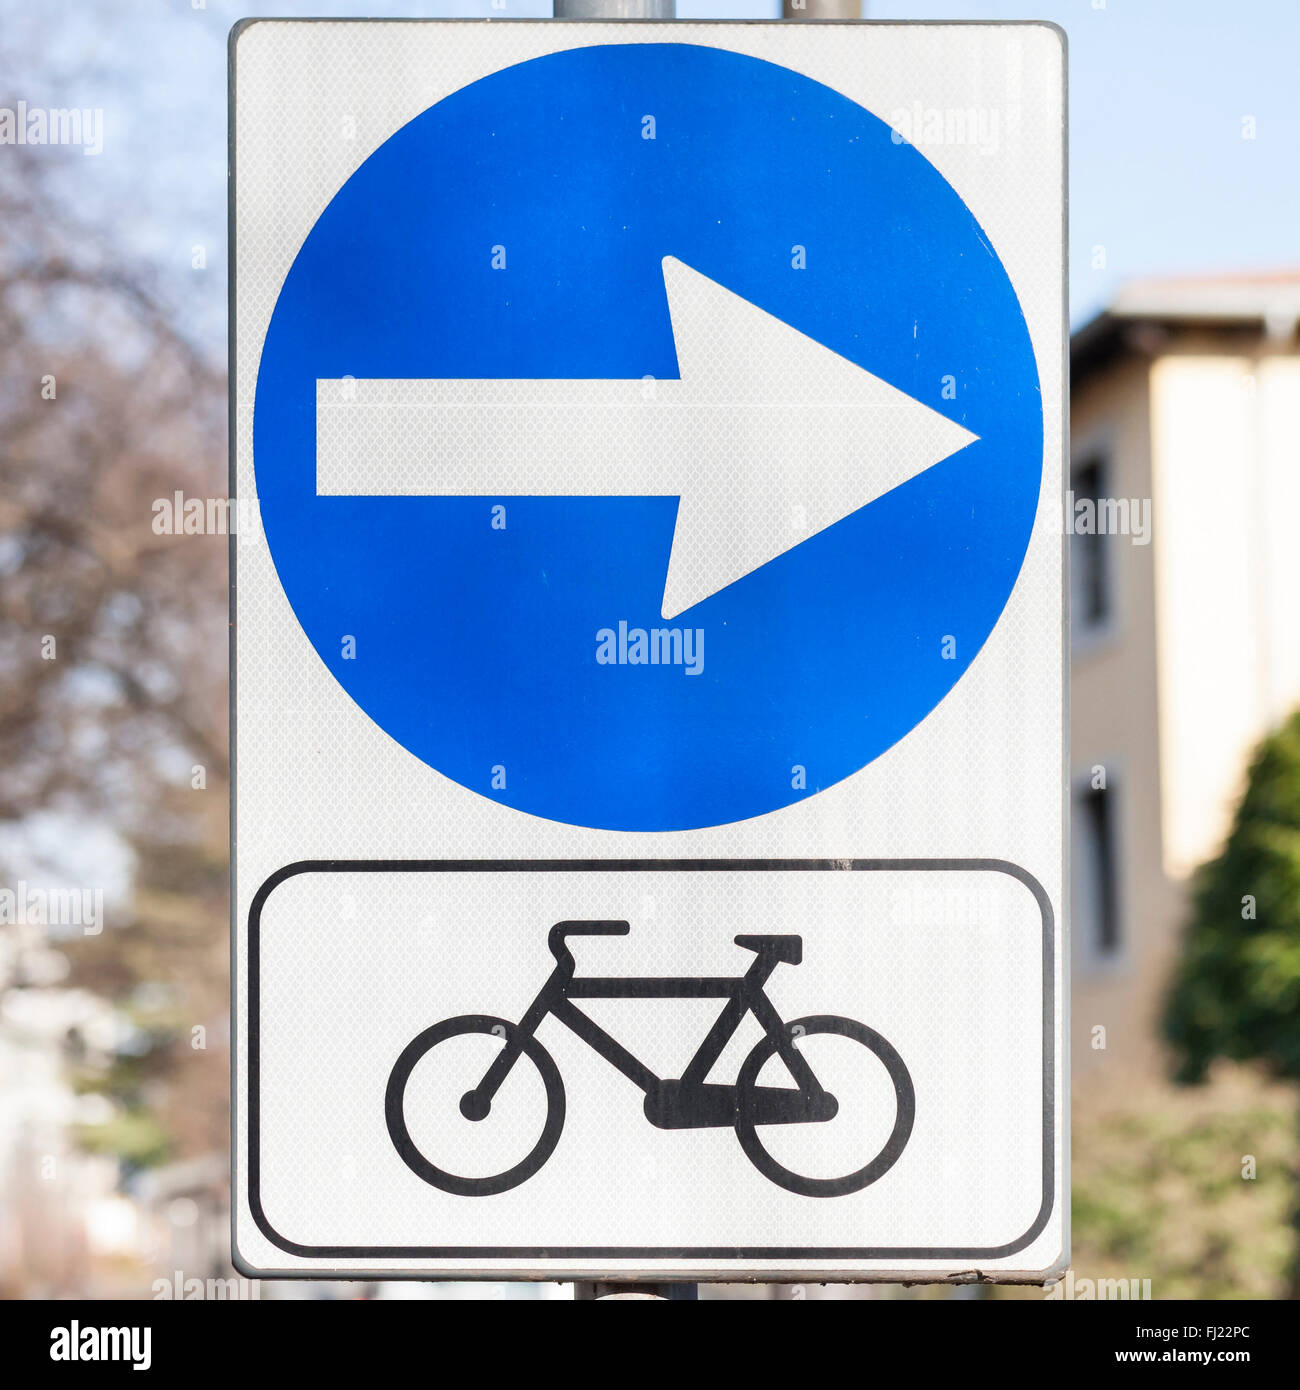 Road sign indicating the direction of the bike path. Stock Photo